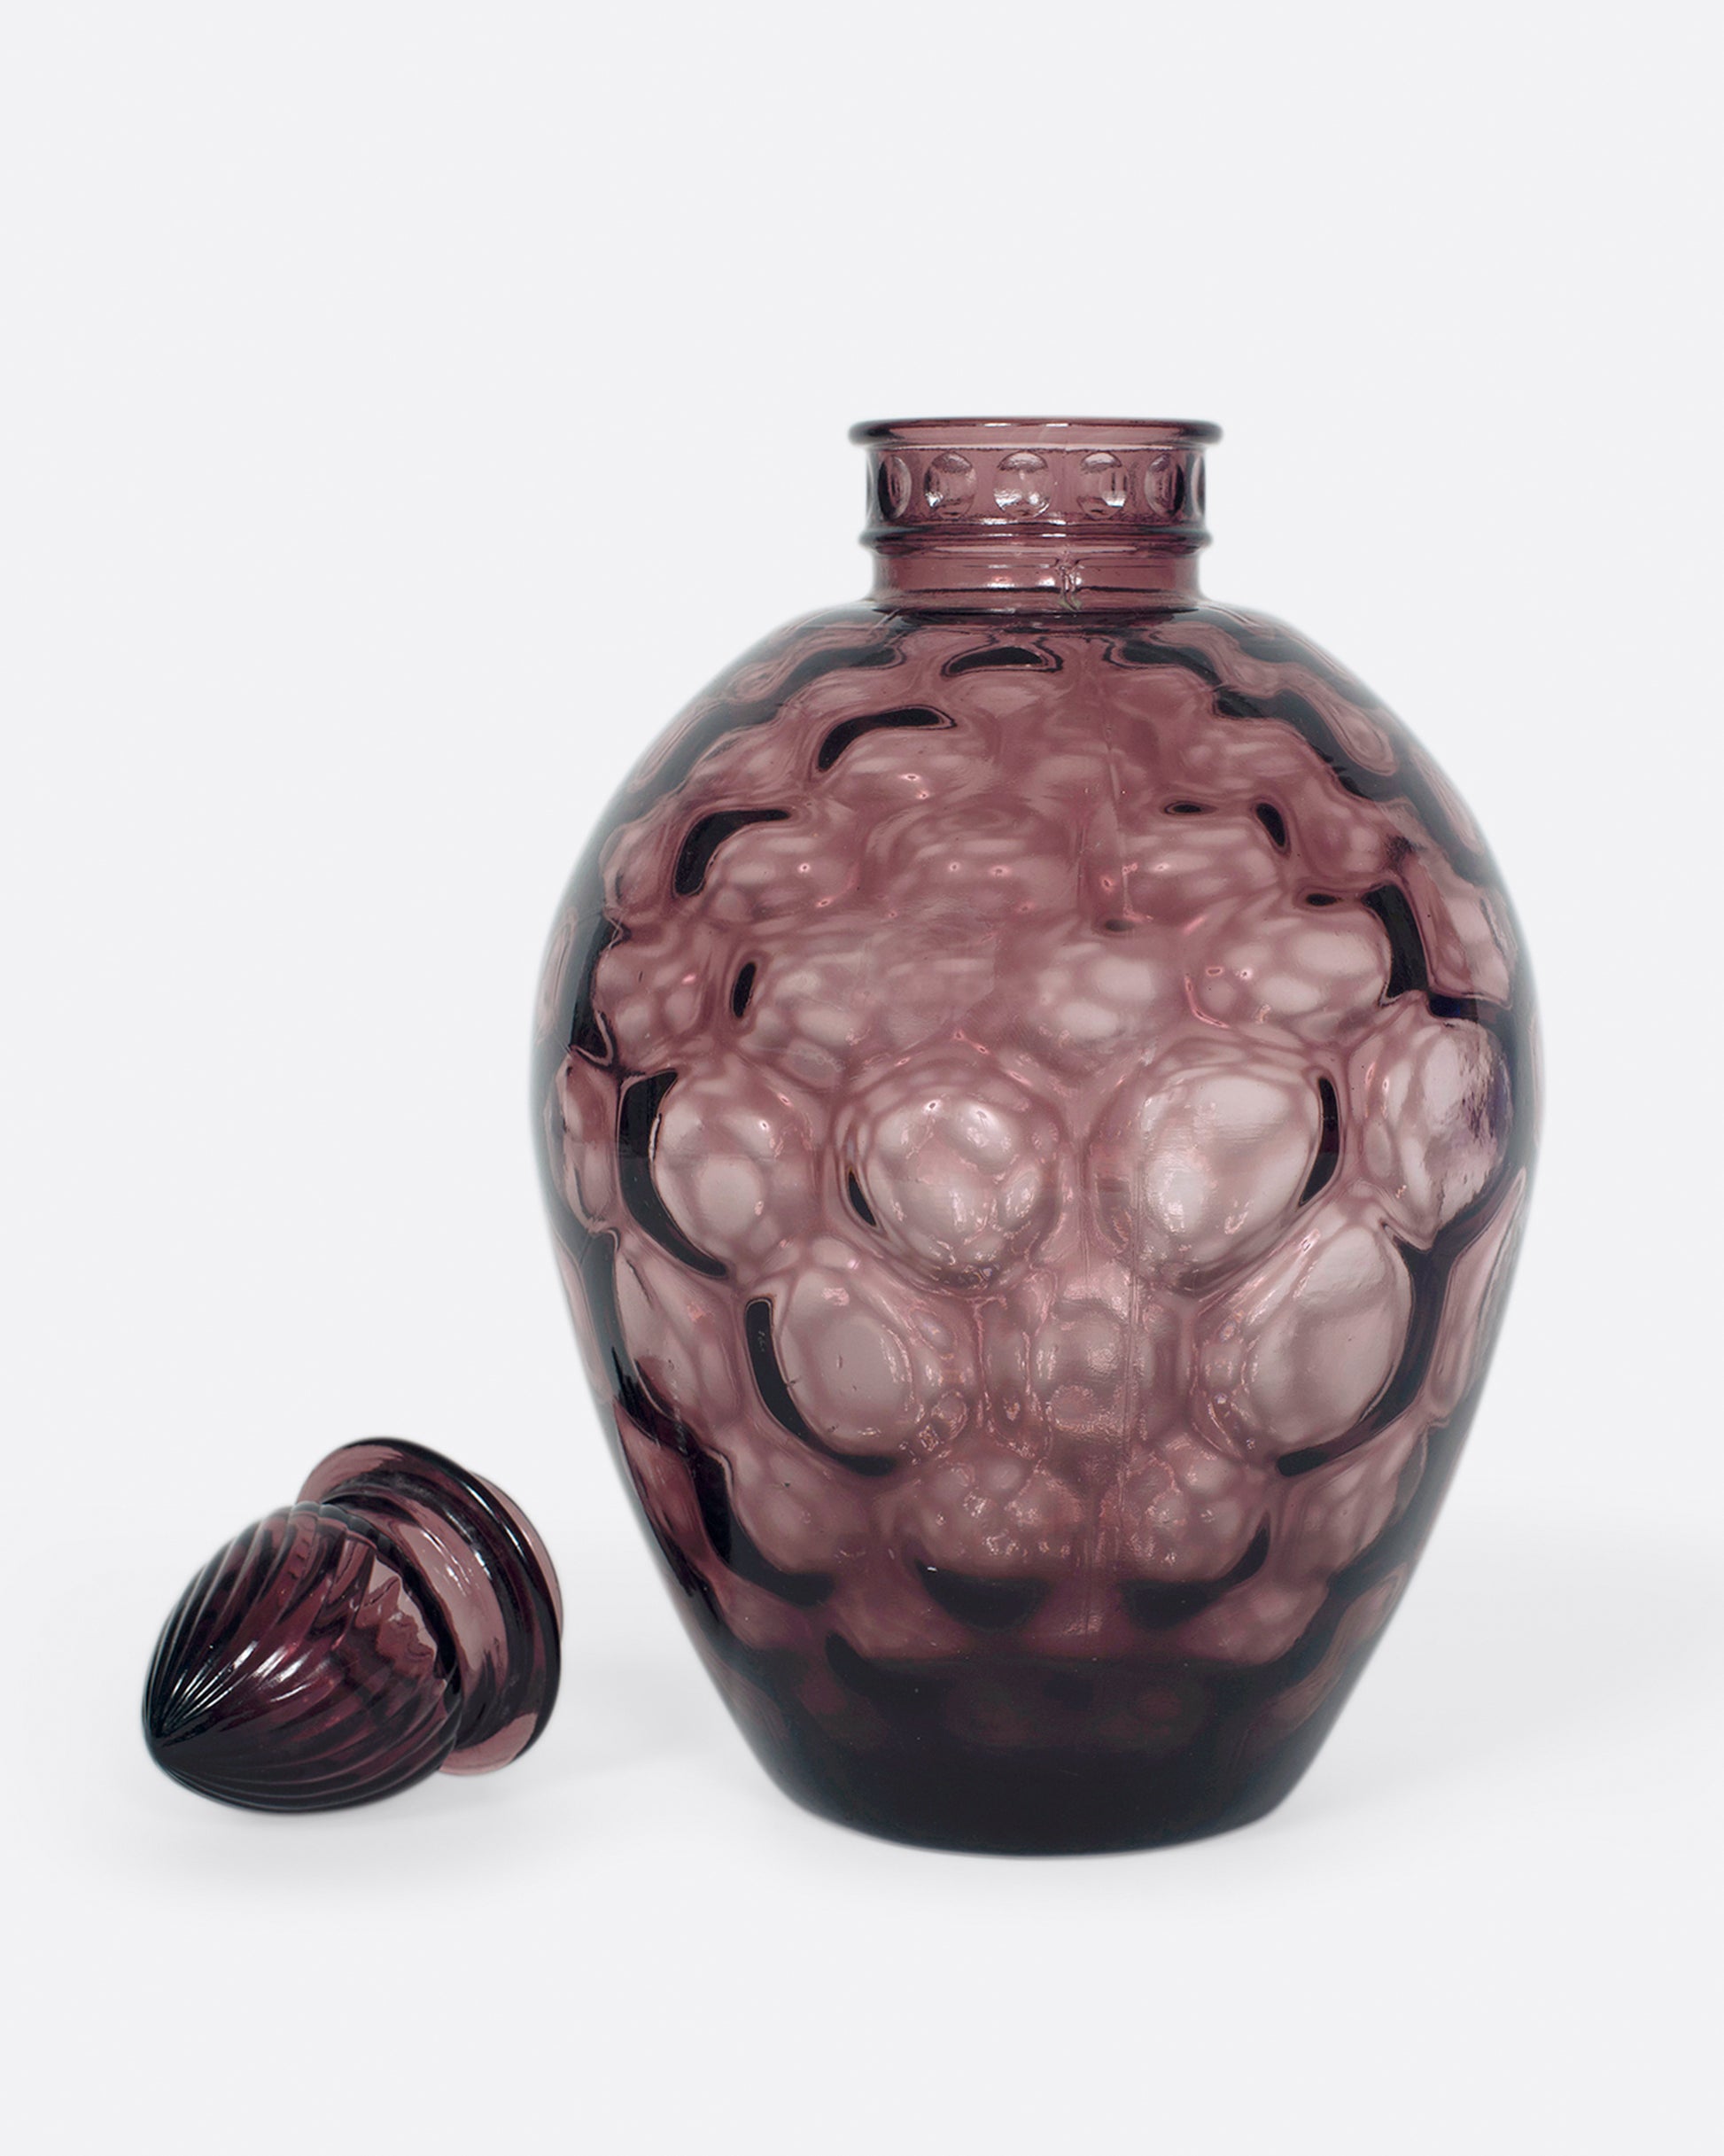 A dark plum, bubble glass bottle with an acorn-shaped stopper.